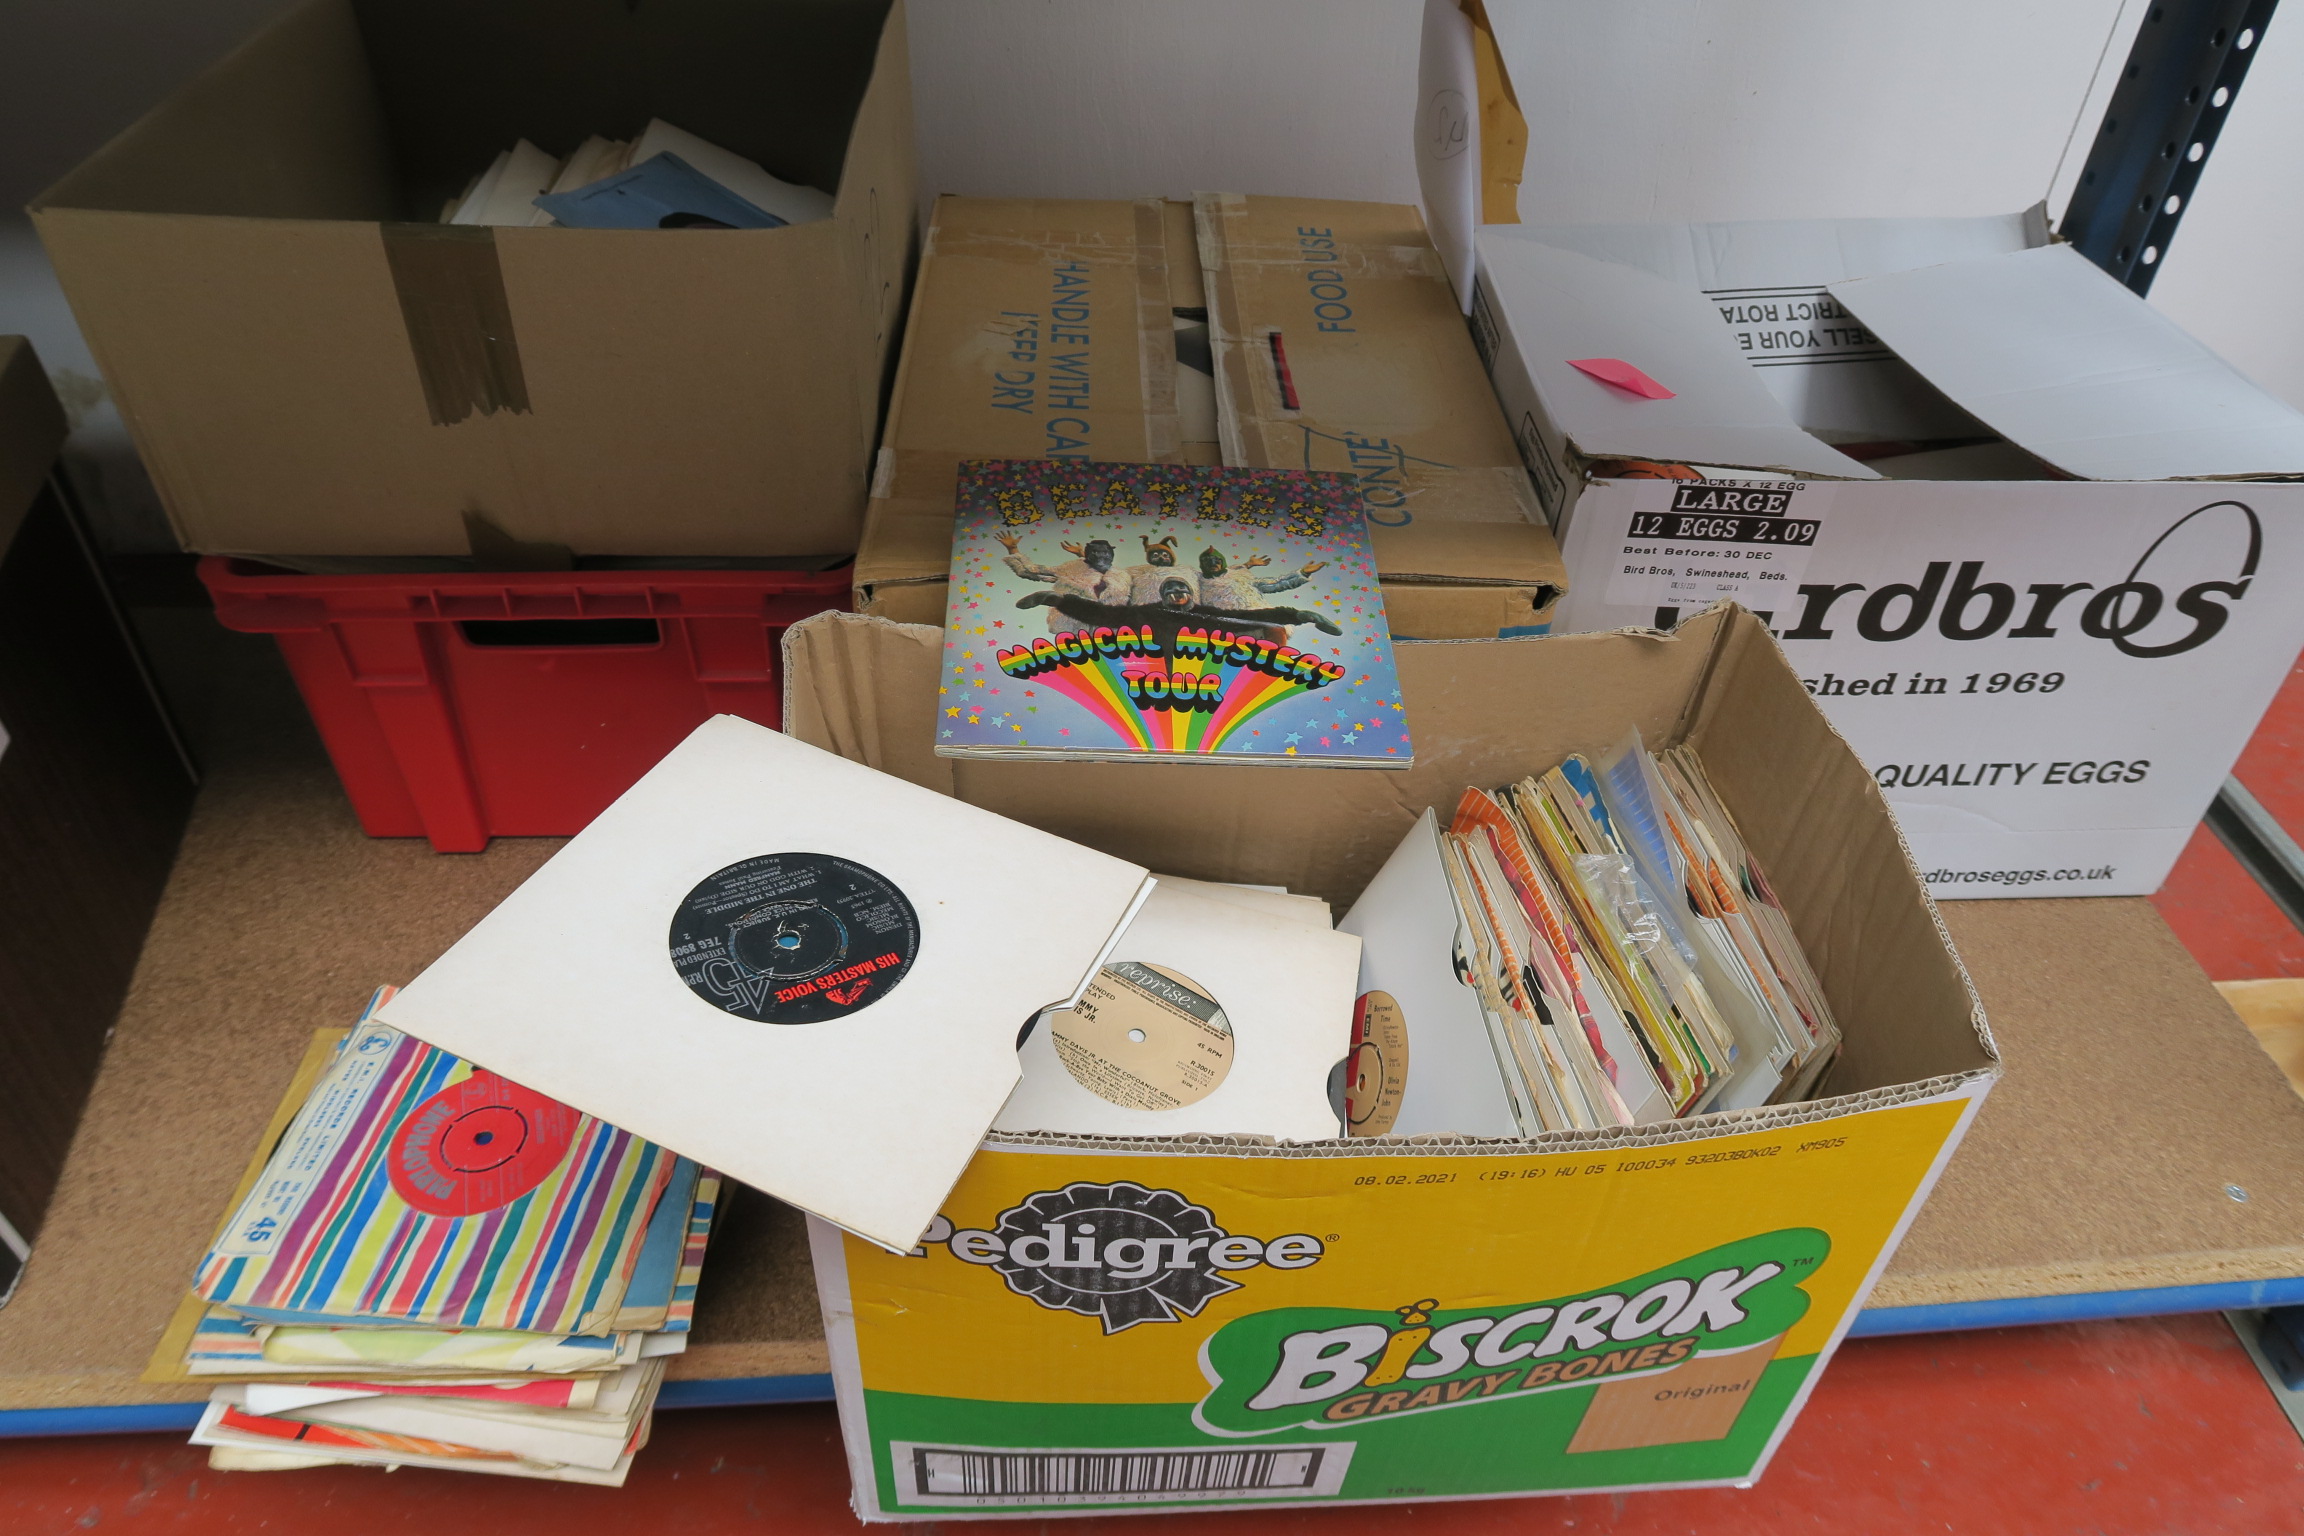 4 boxes of 7 inch singles and 1 box of LPs - good lot with many singles in their original sleeves